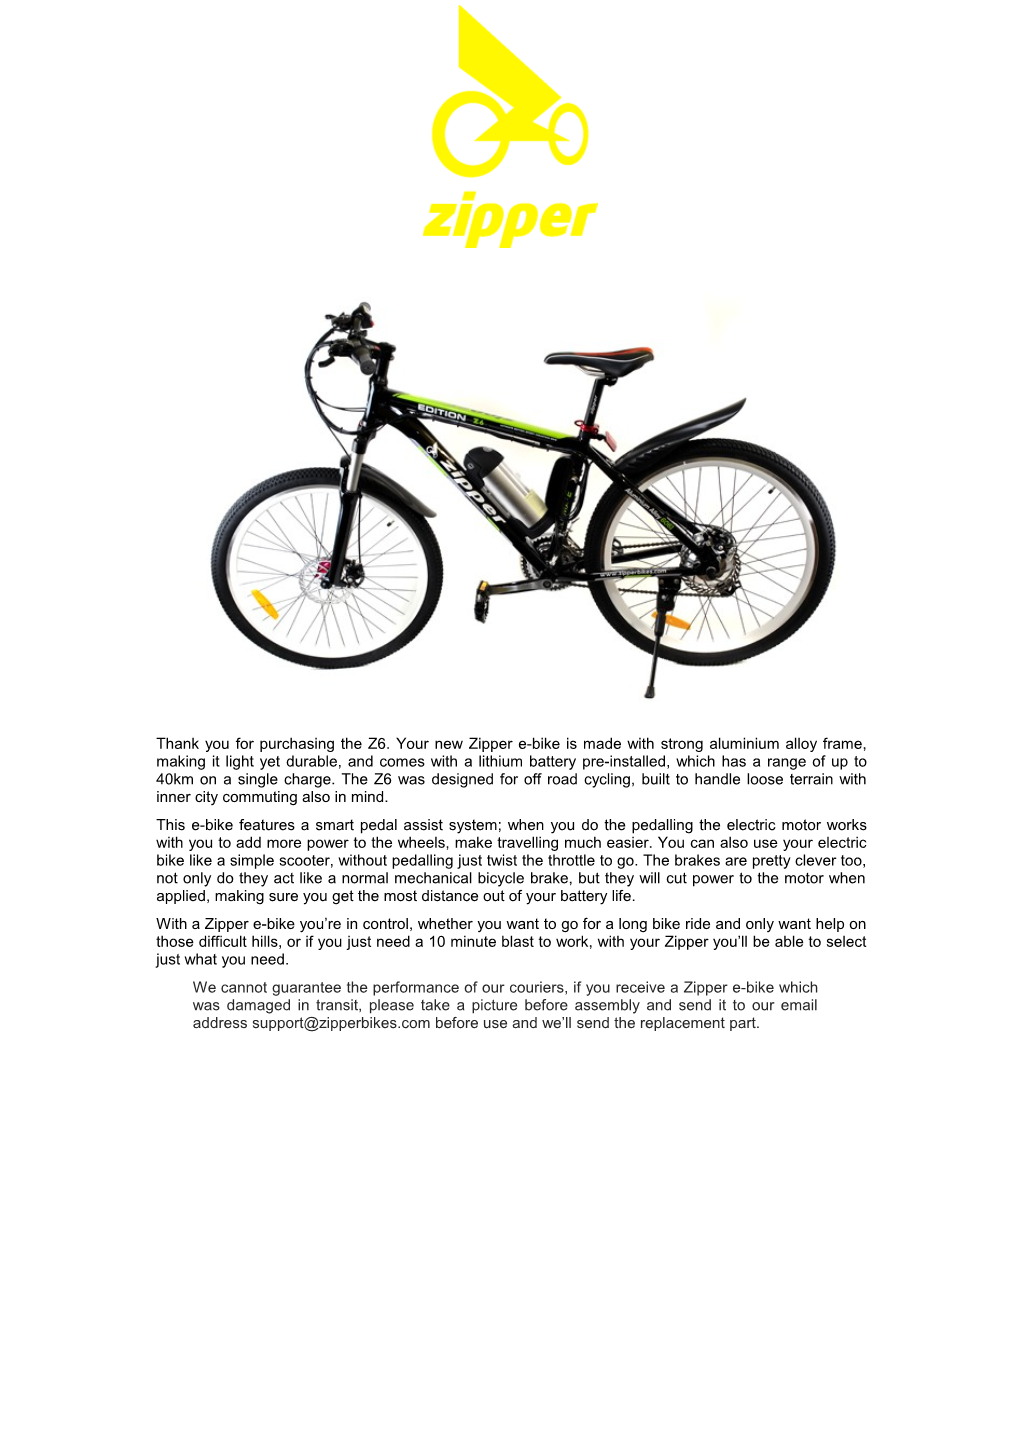 Thank You for Purchasing the Z6. Your New Zipper E-Bike Is Made with Strong Aluminium Alloy